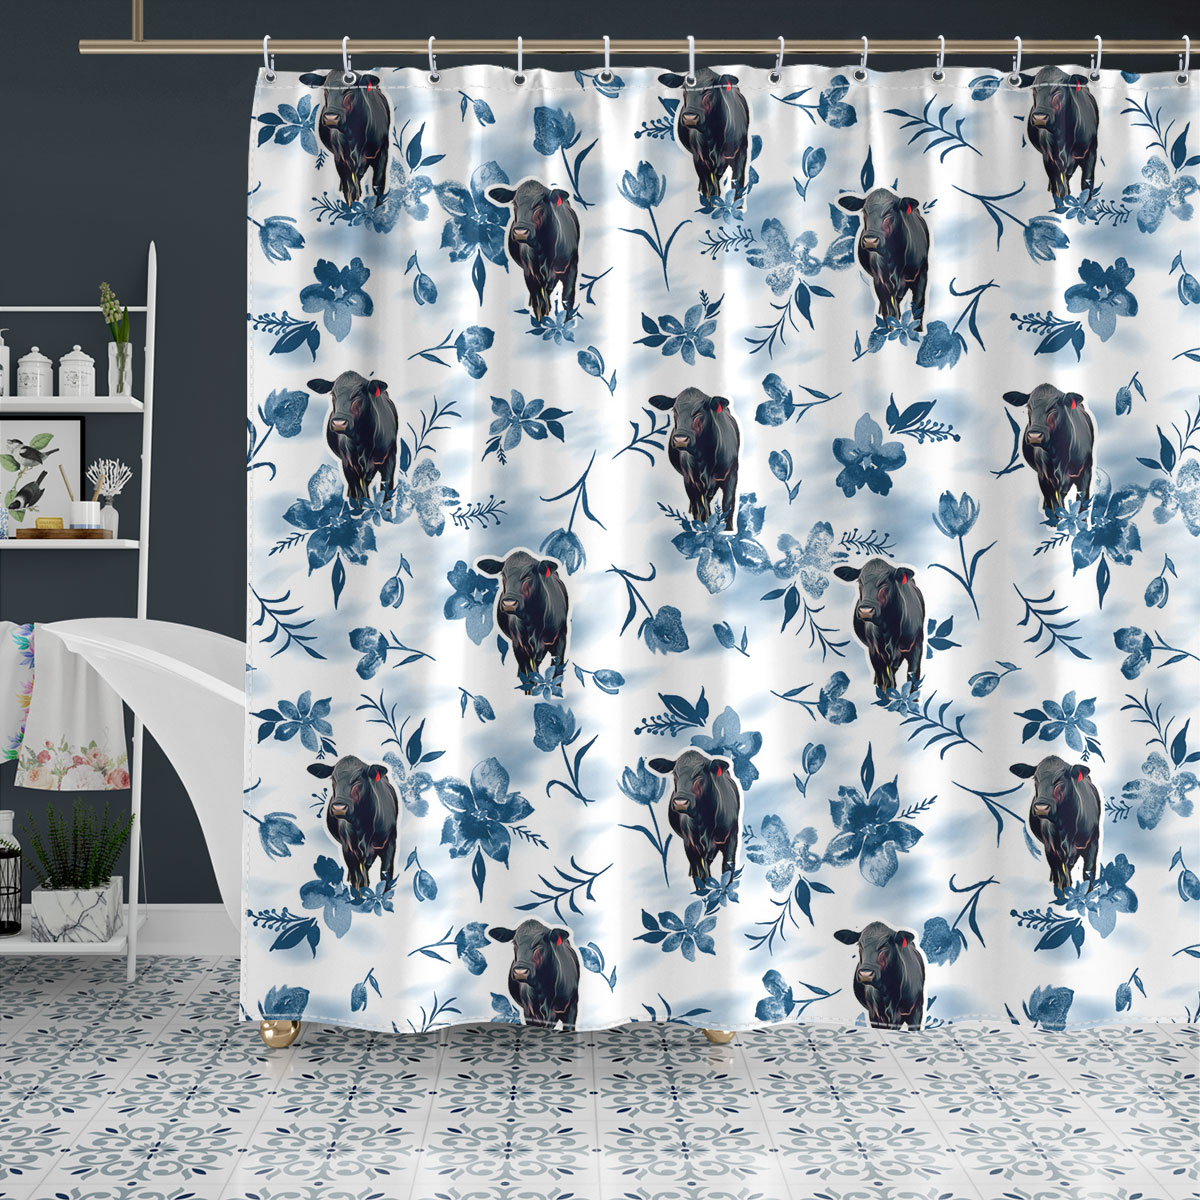 Black Angus Watercolor Flowers and Leaves Tie Dye Pattern Shower Curtain